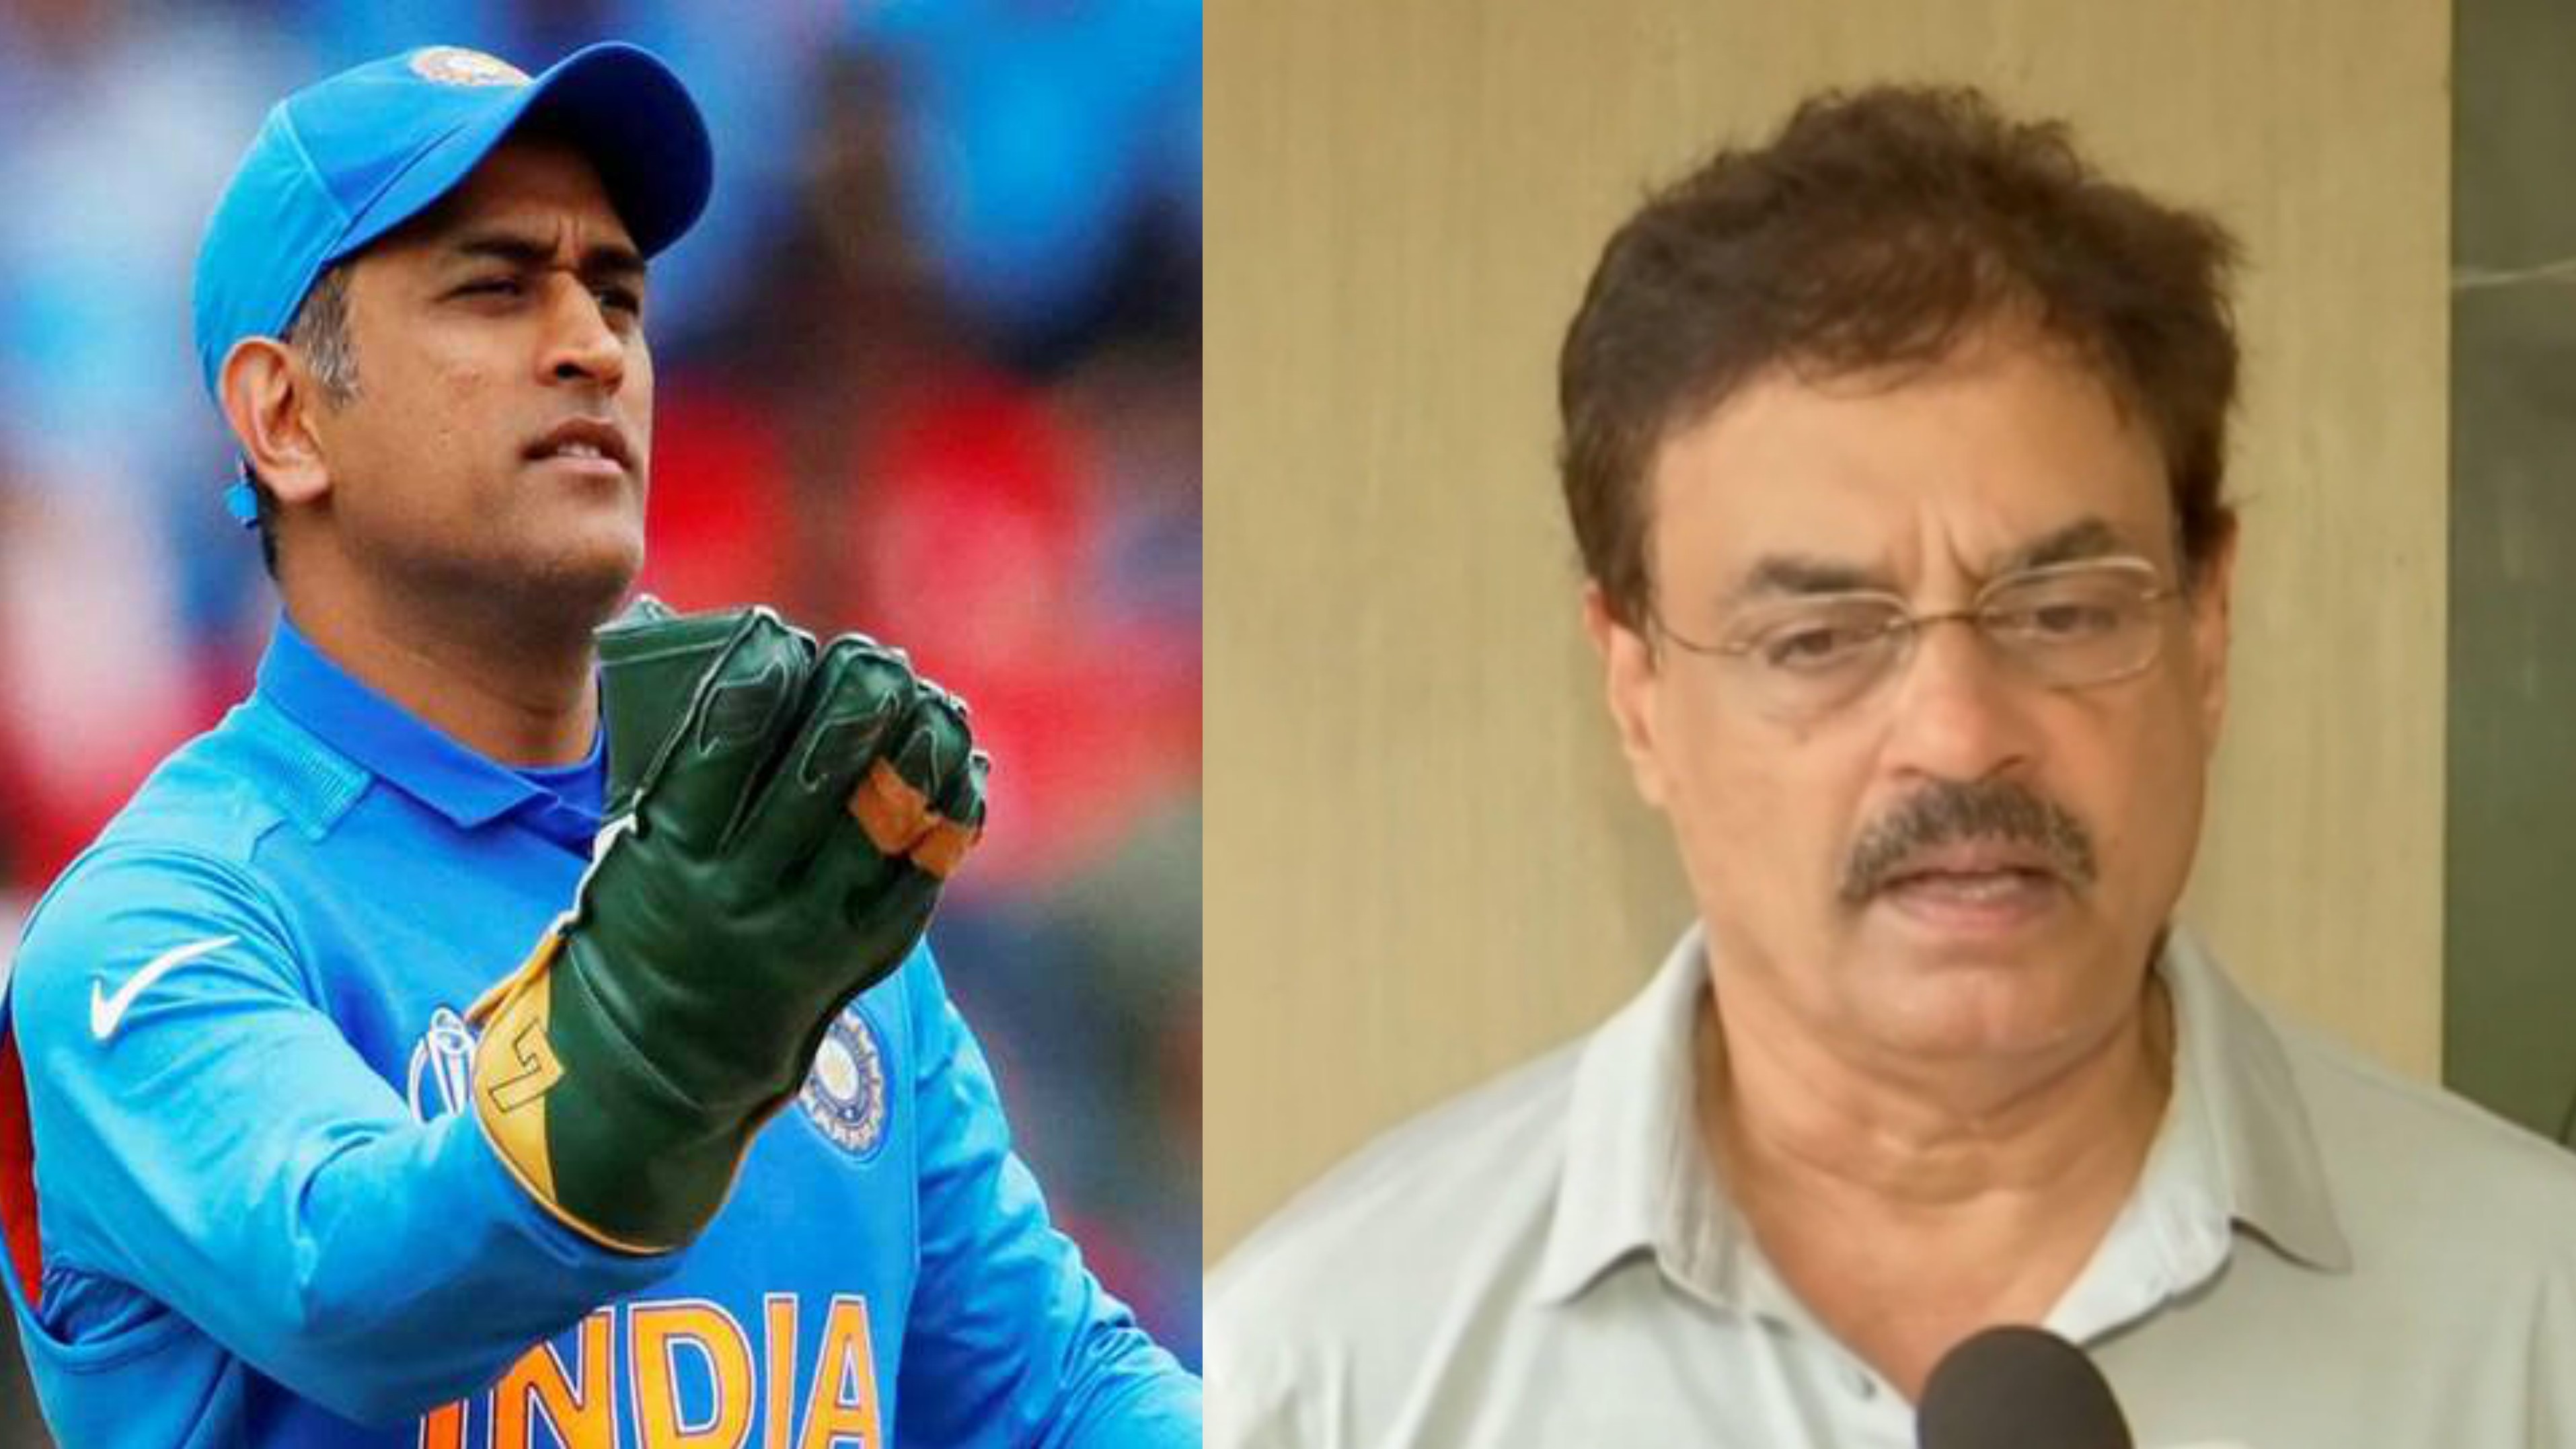 Difficult to fill in his shoes as his contribution was huge: Dilip Vengsarkar on MS Dhoni